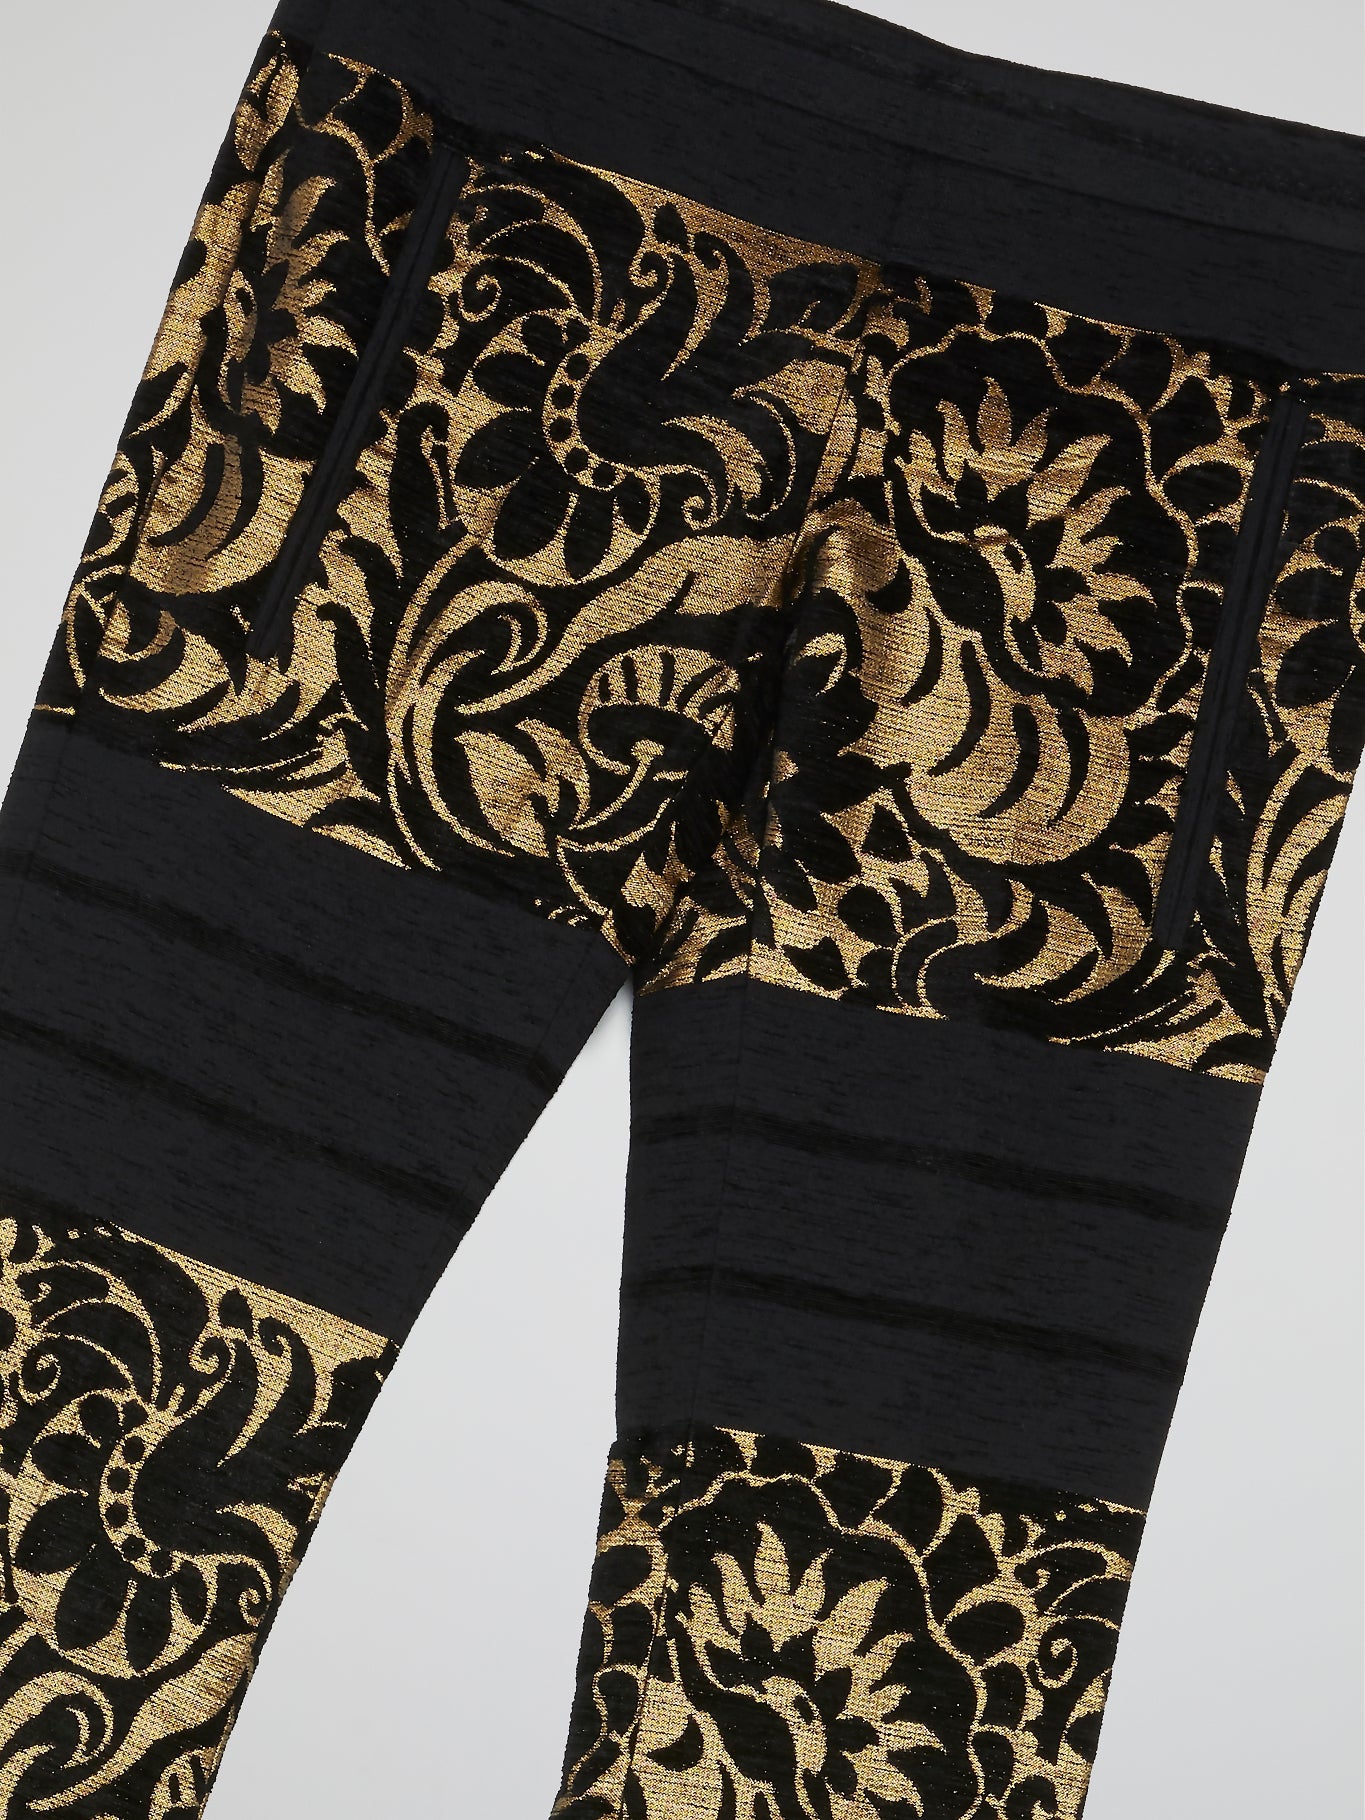 Baroque Print Bootcut Trousers